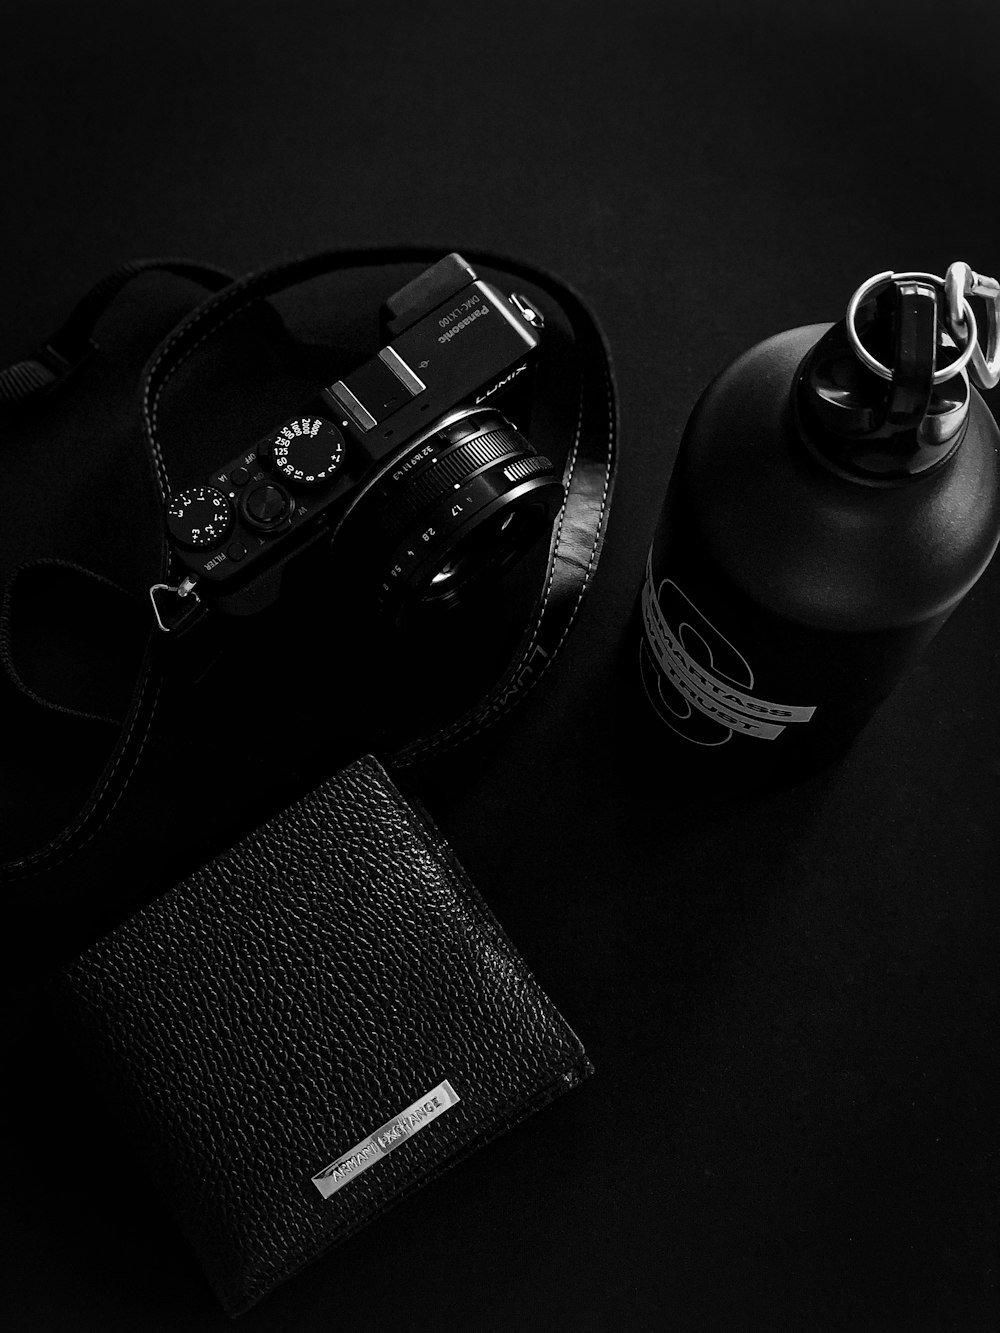 a camera, wallet, and bottle on a black surface